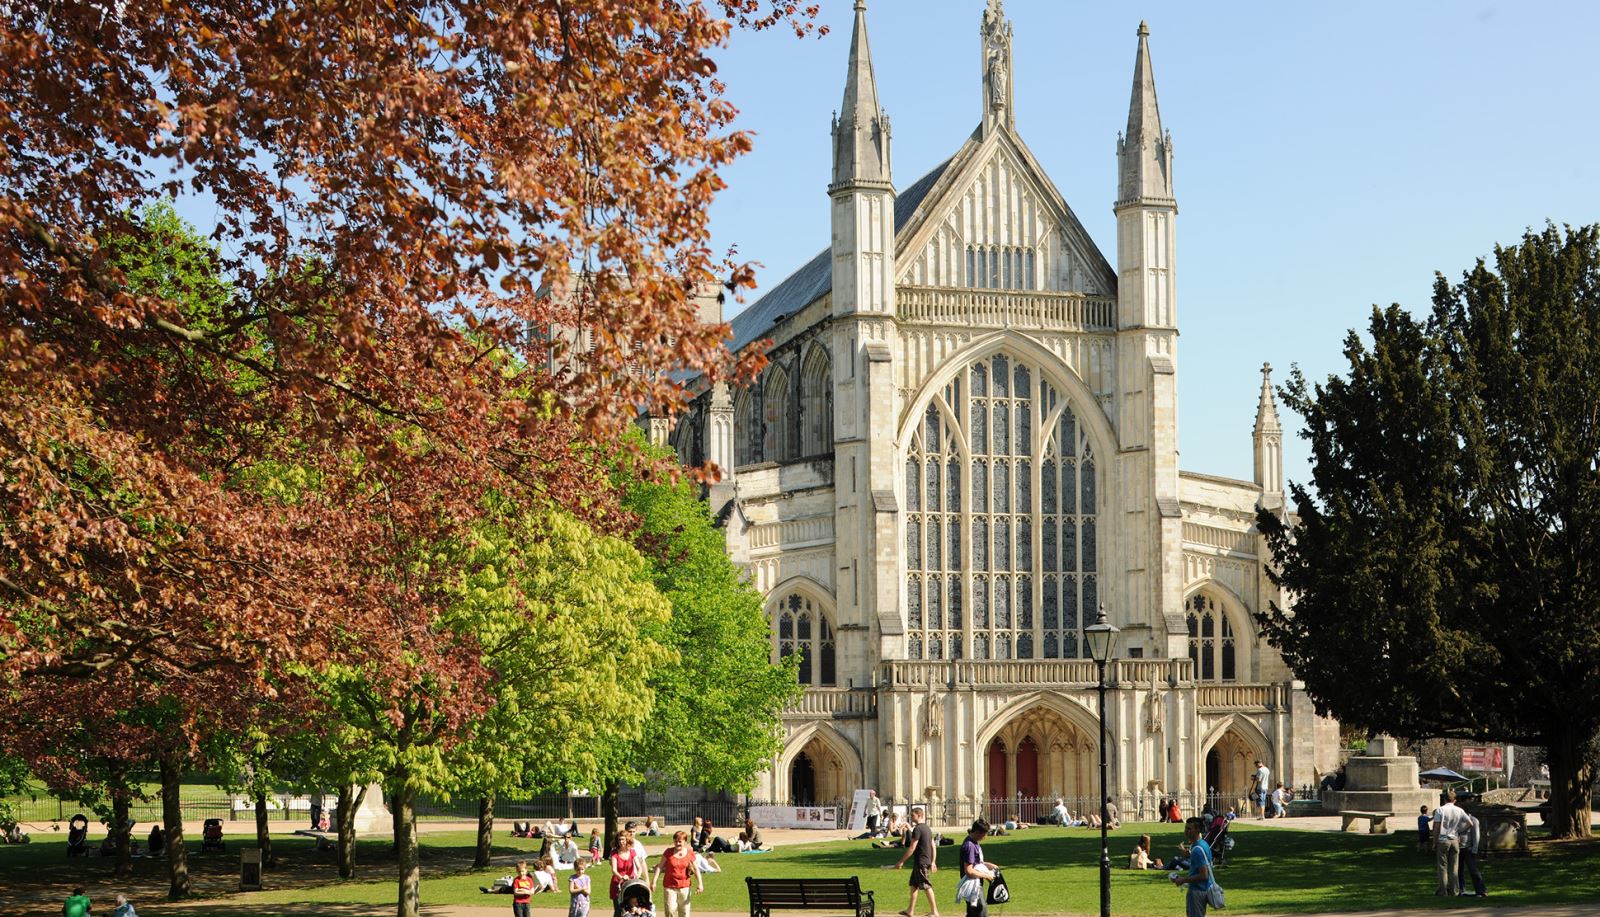 Winchester Cathedral - the seat of Anglo-Saxon and Norman power.